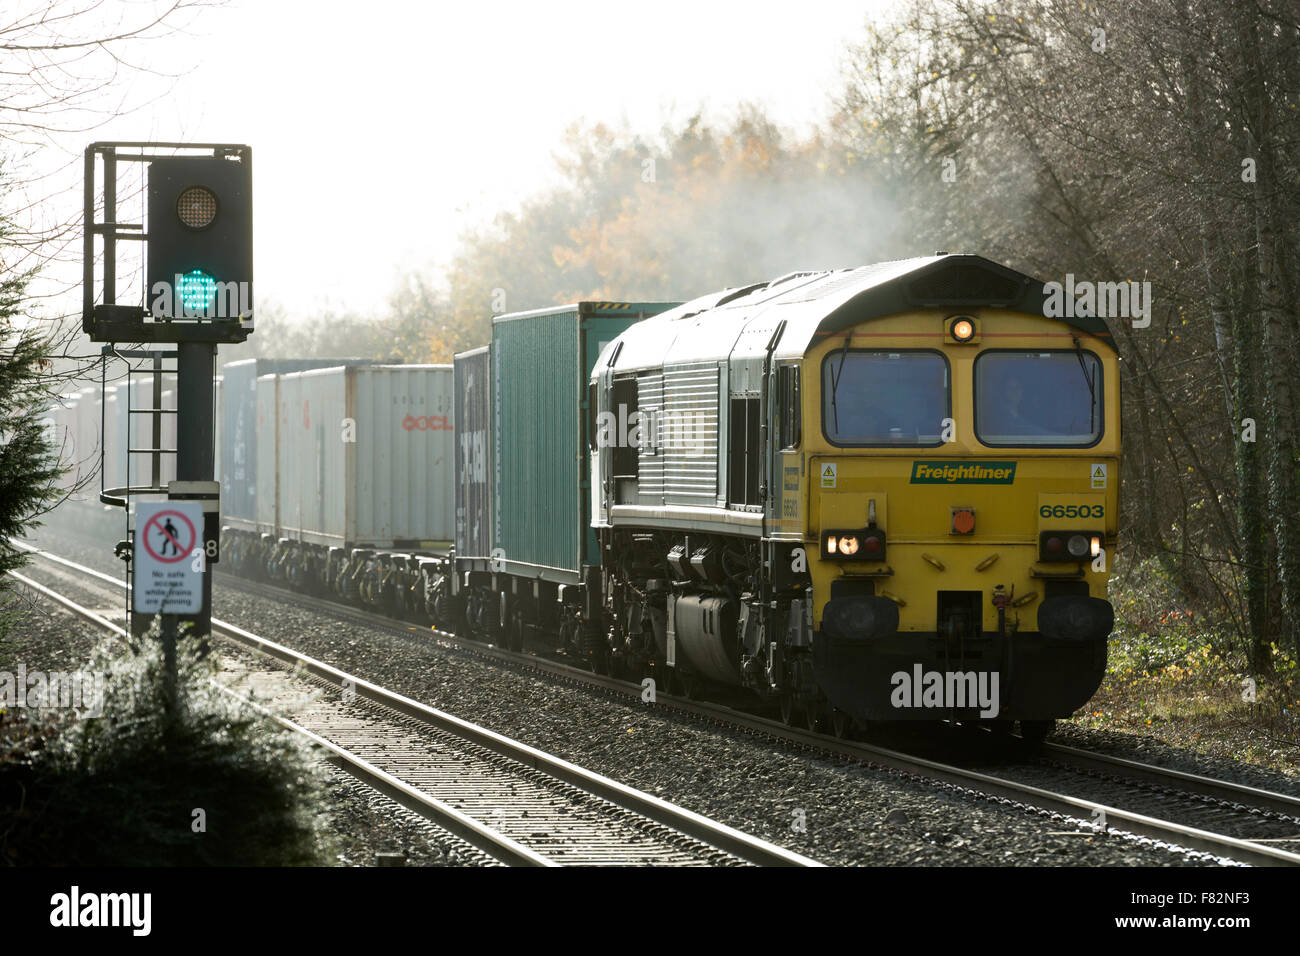 A Class 66 diesel locomotive pulling a freightliner train at Lapworth, Warwickshire, England, UK Stock Photo